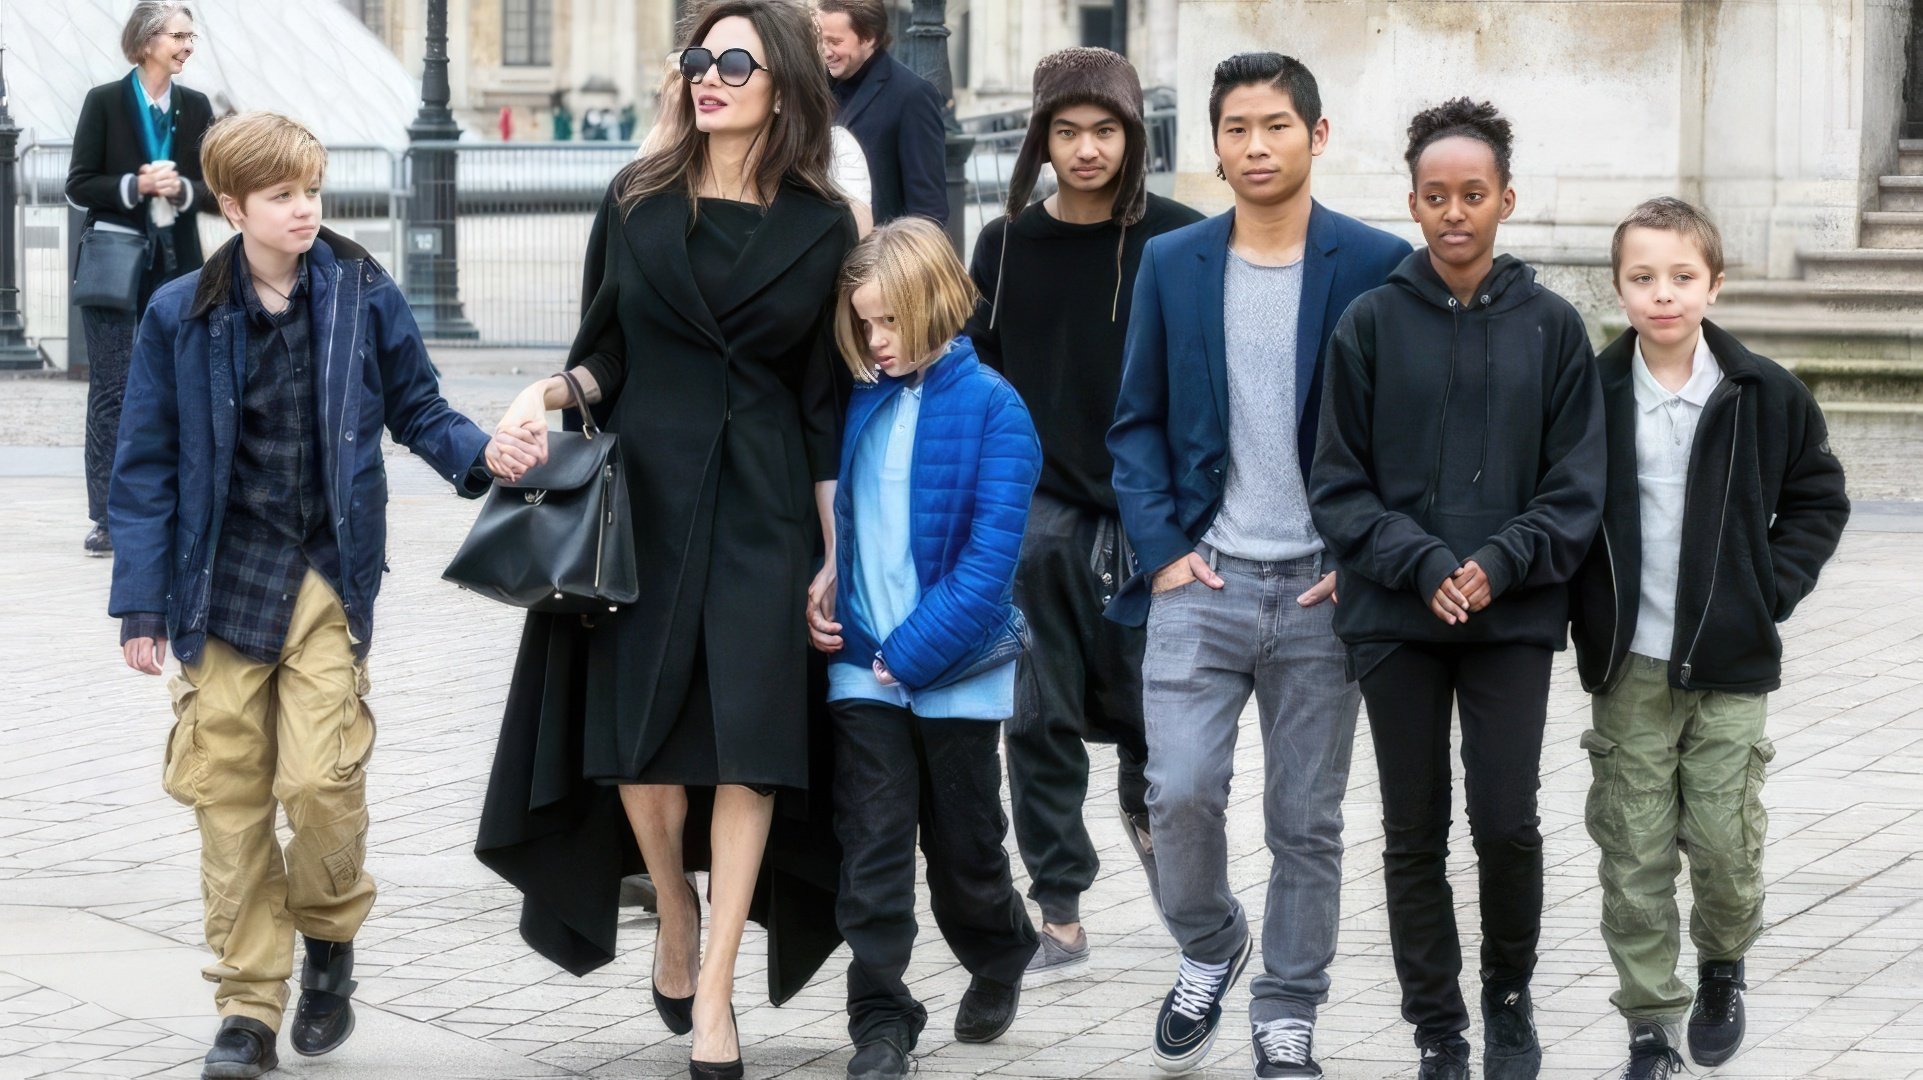 After the divorce, the children stayed with Angelina Jolie